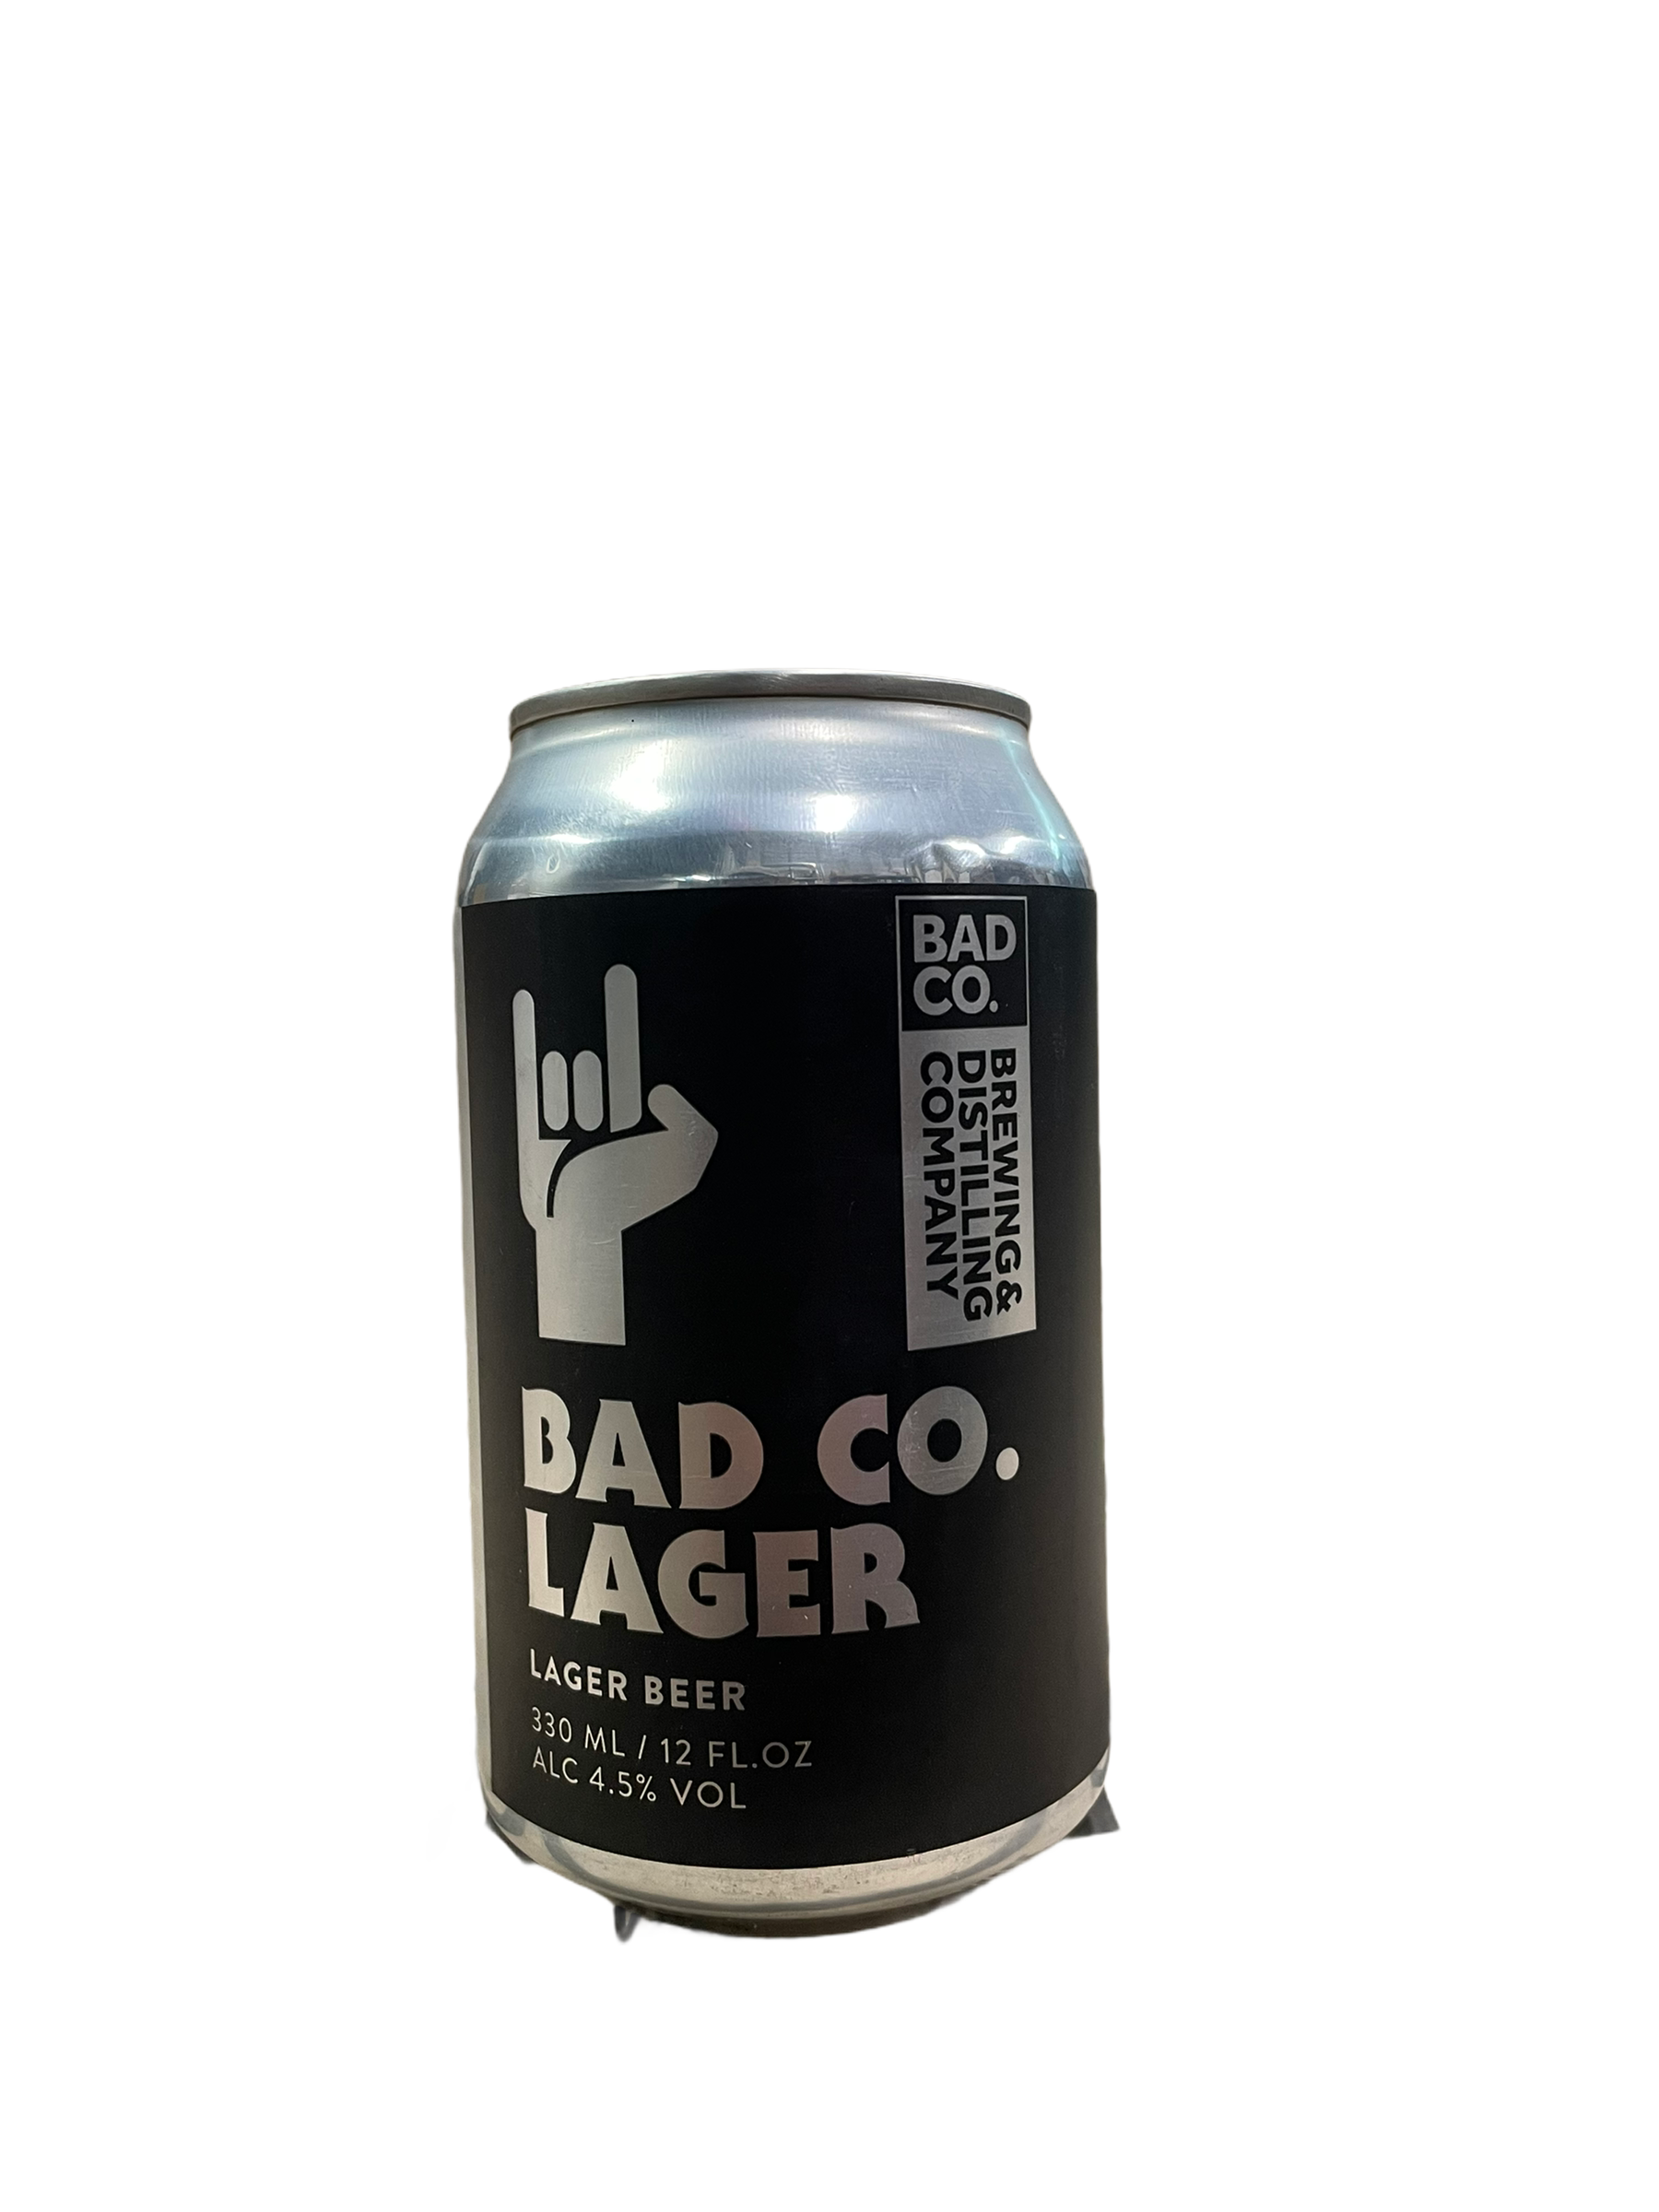 Badco Lager